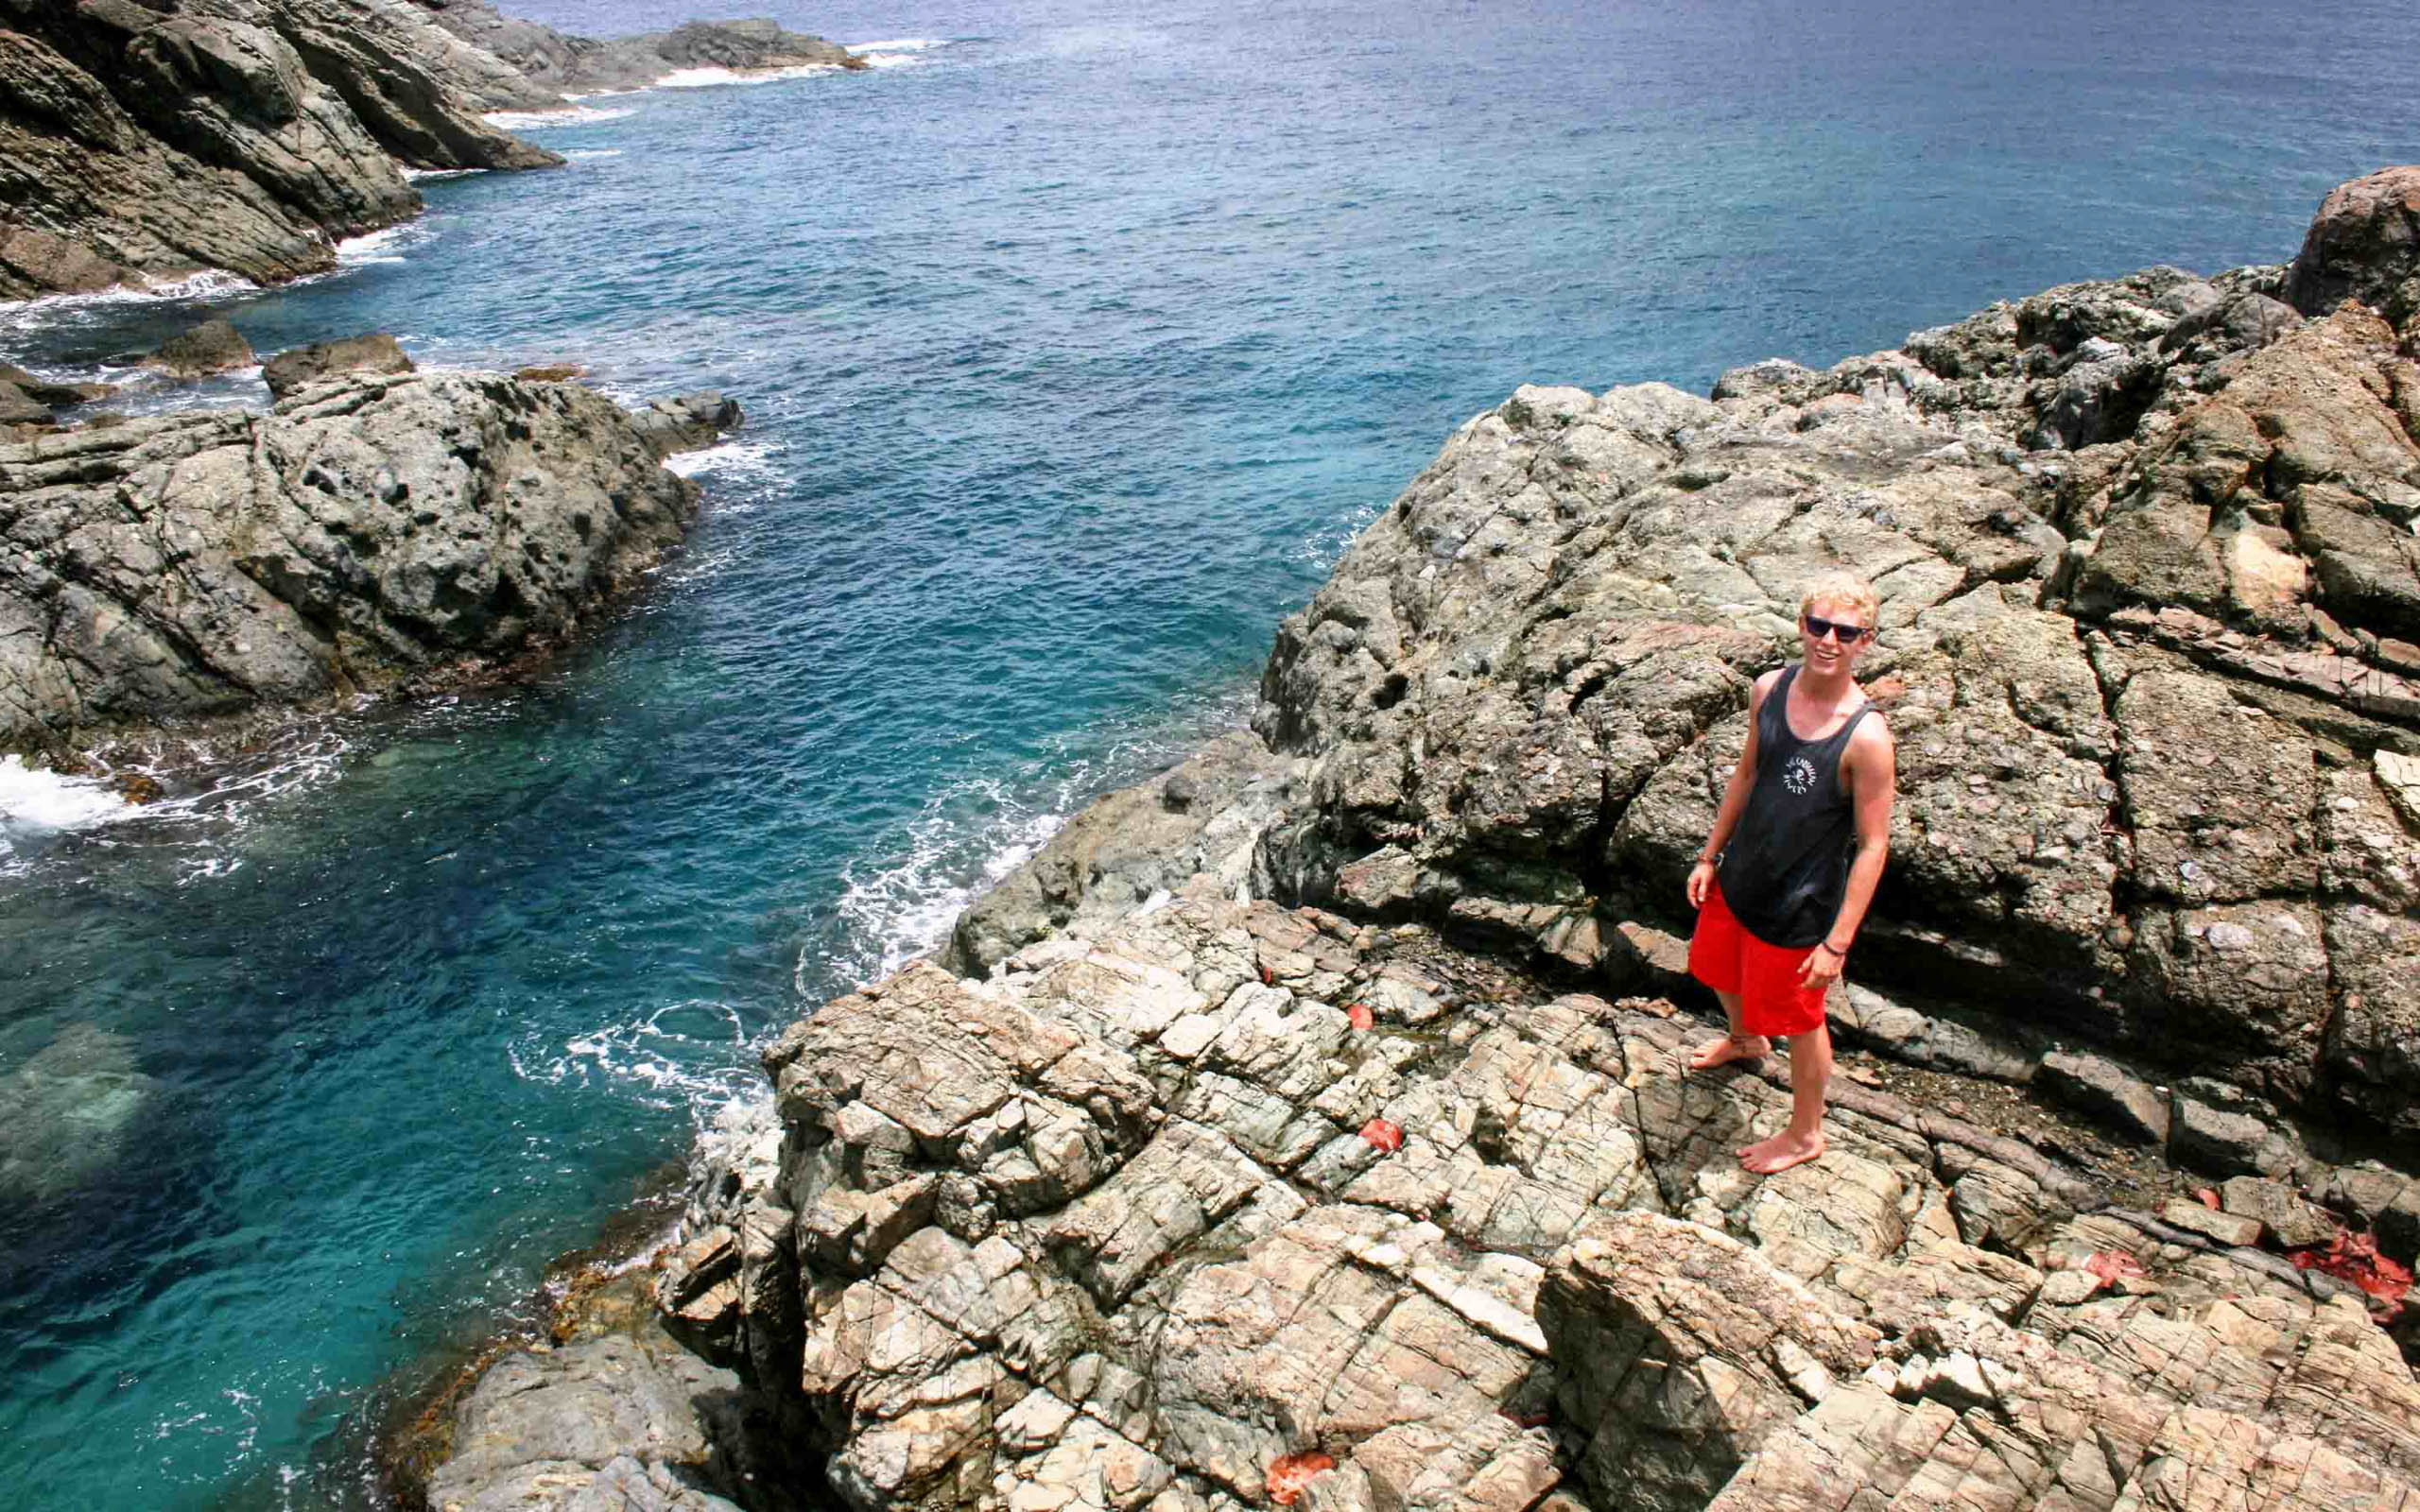 A man standing on a rocky cliff near the ocean.